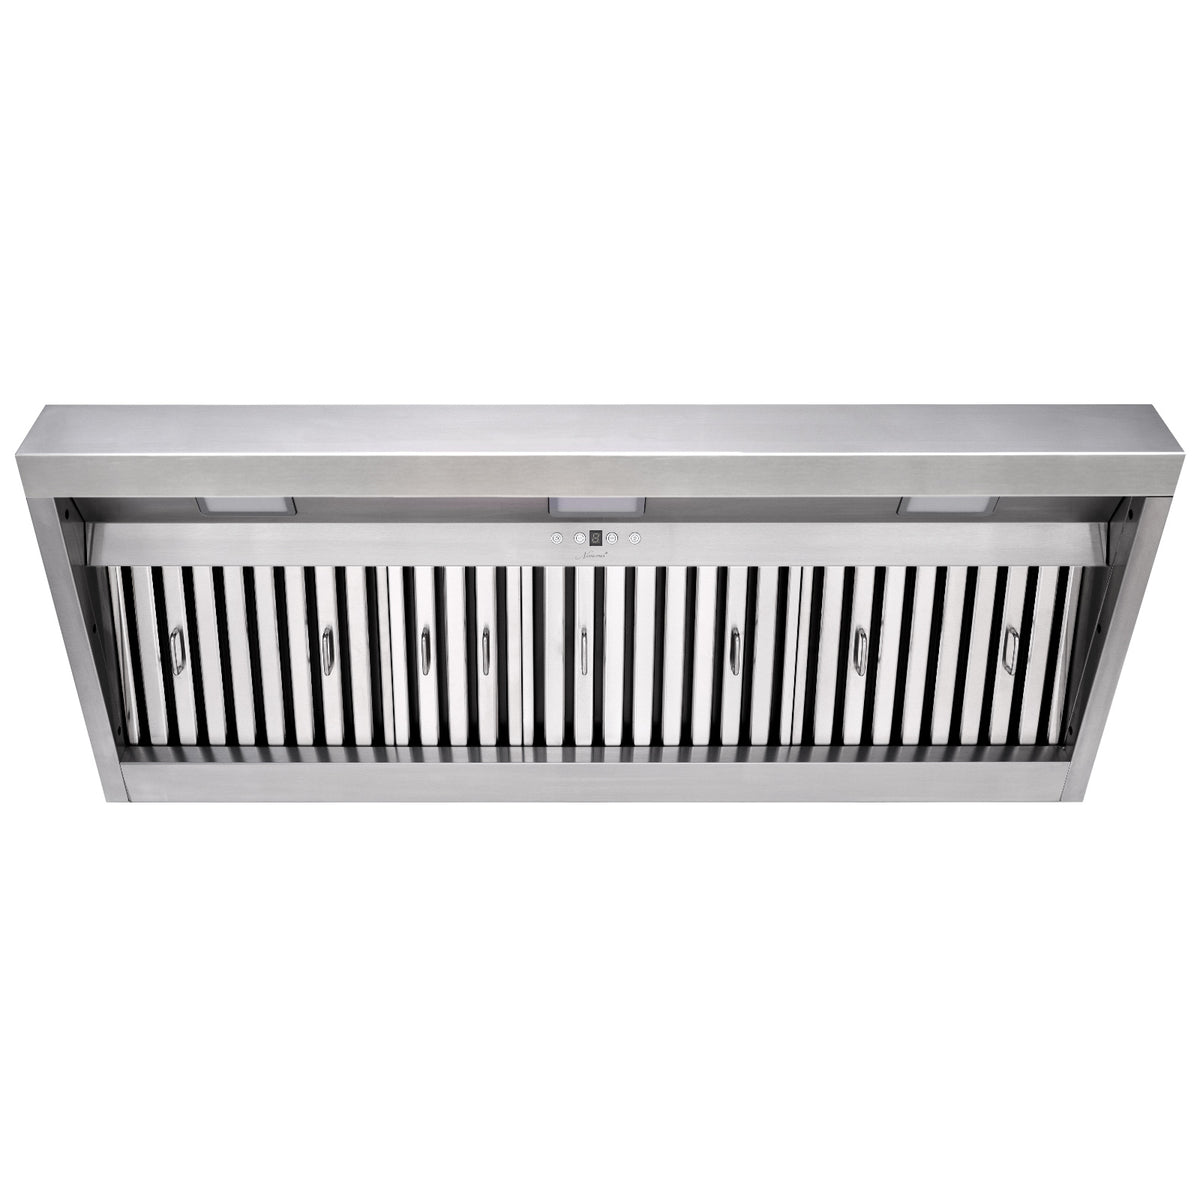 Range Hood Insert 48 Inch, 1200 CFM Built-in Kitchen Hood with 4 Speeds, Ultra-Quiet Stainless Steel Ducted Vent Hood Insert with Dimmable LED Lights and Dishwasher Safe Filter